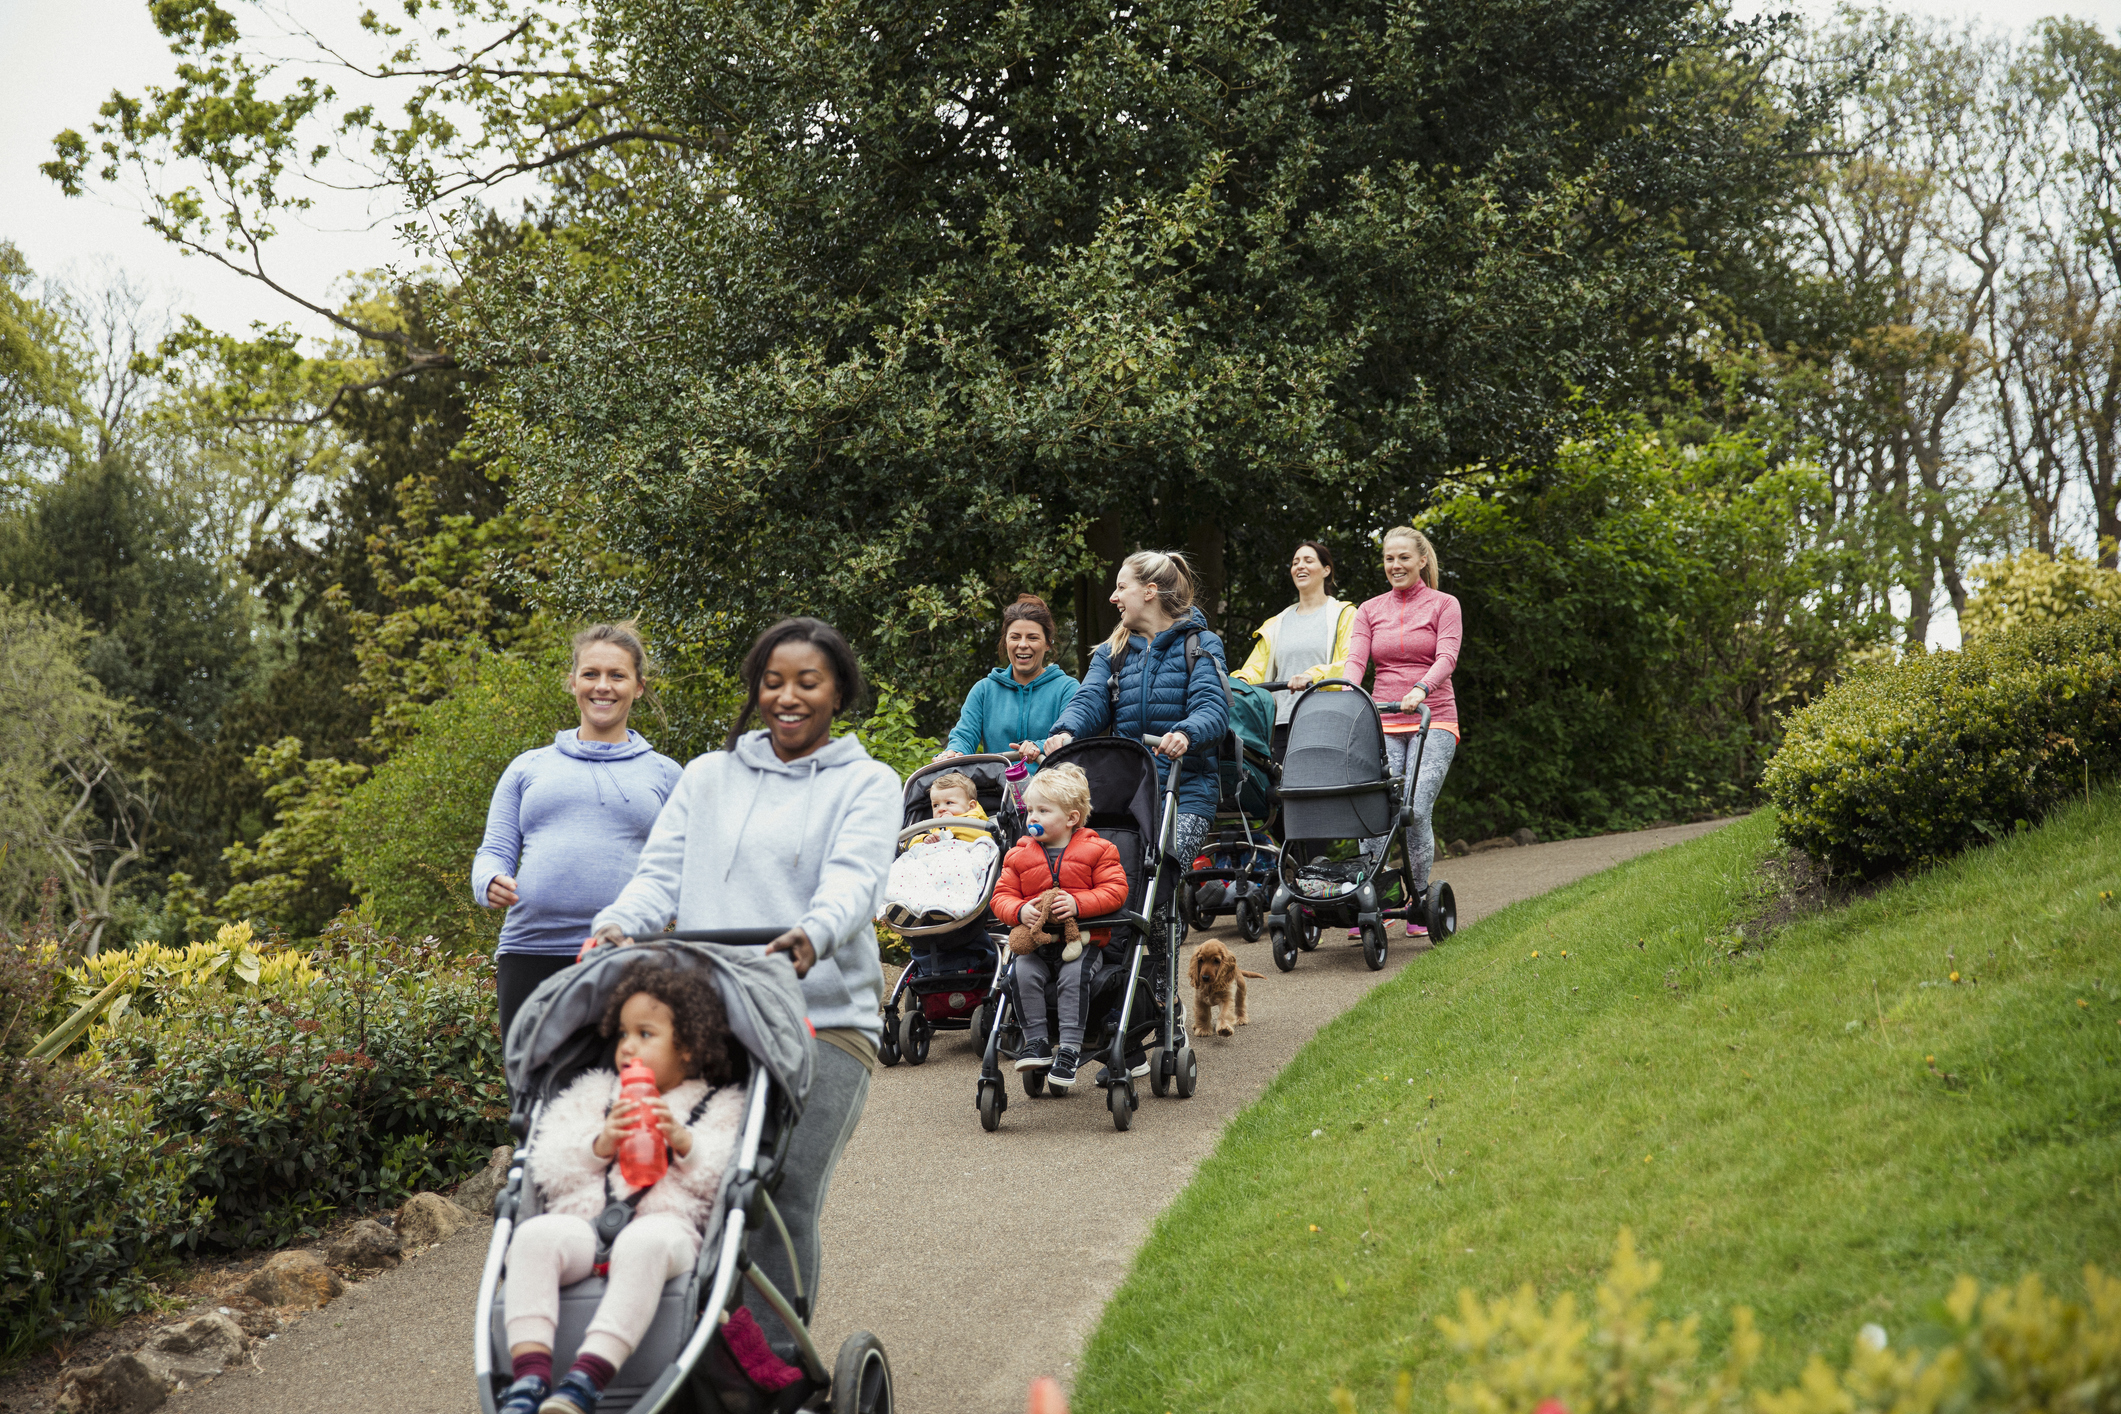 Group of moms walking with strollers in a park